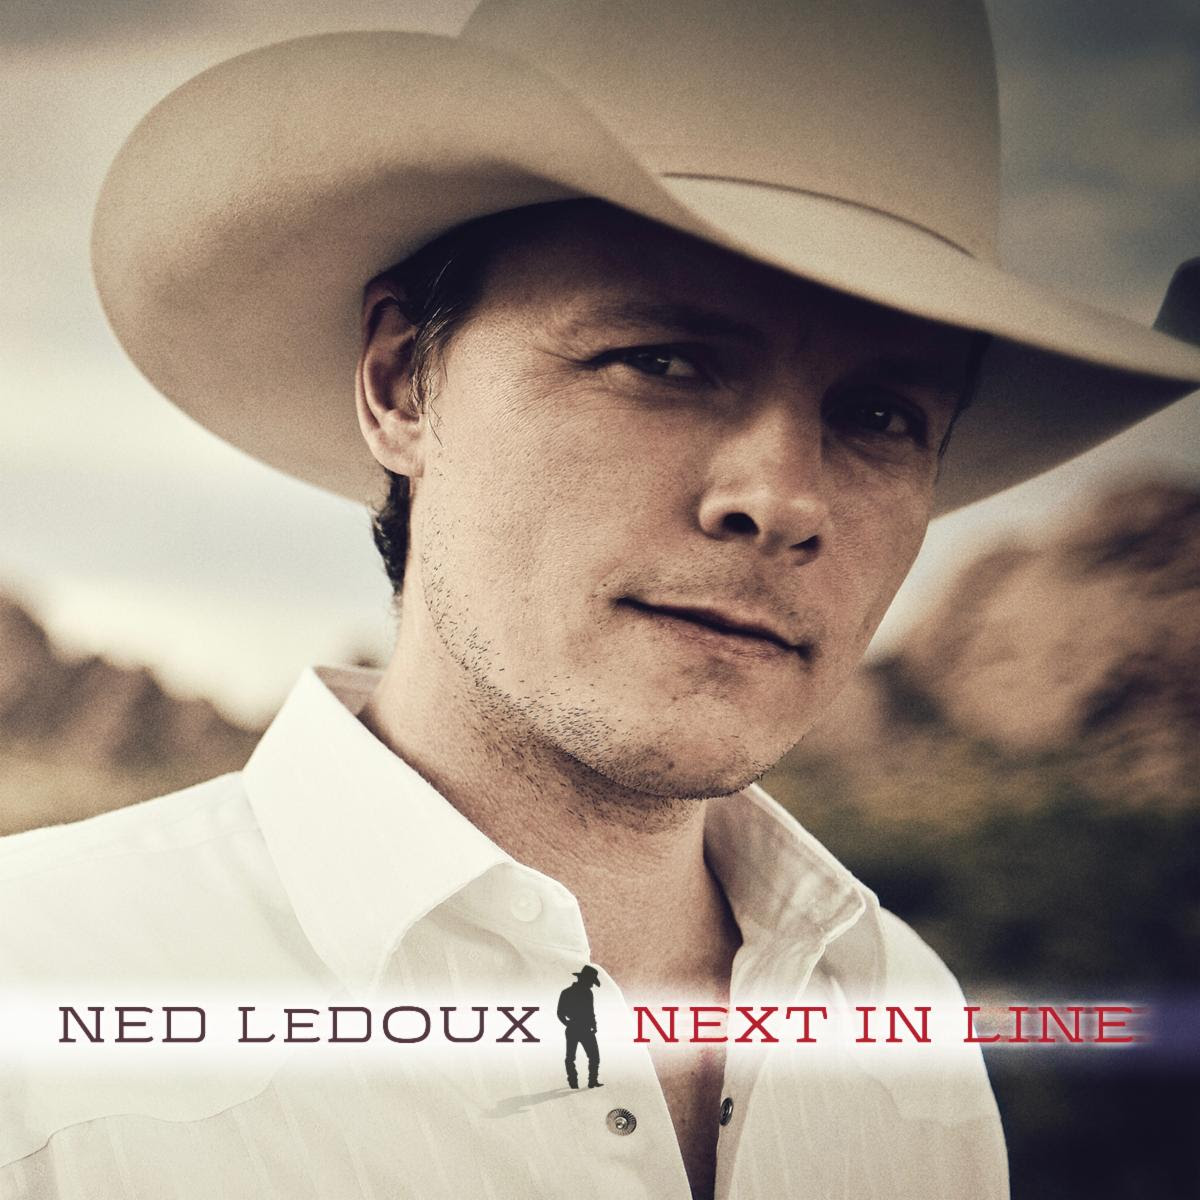 ned ledoux next in line new album old fashioned